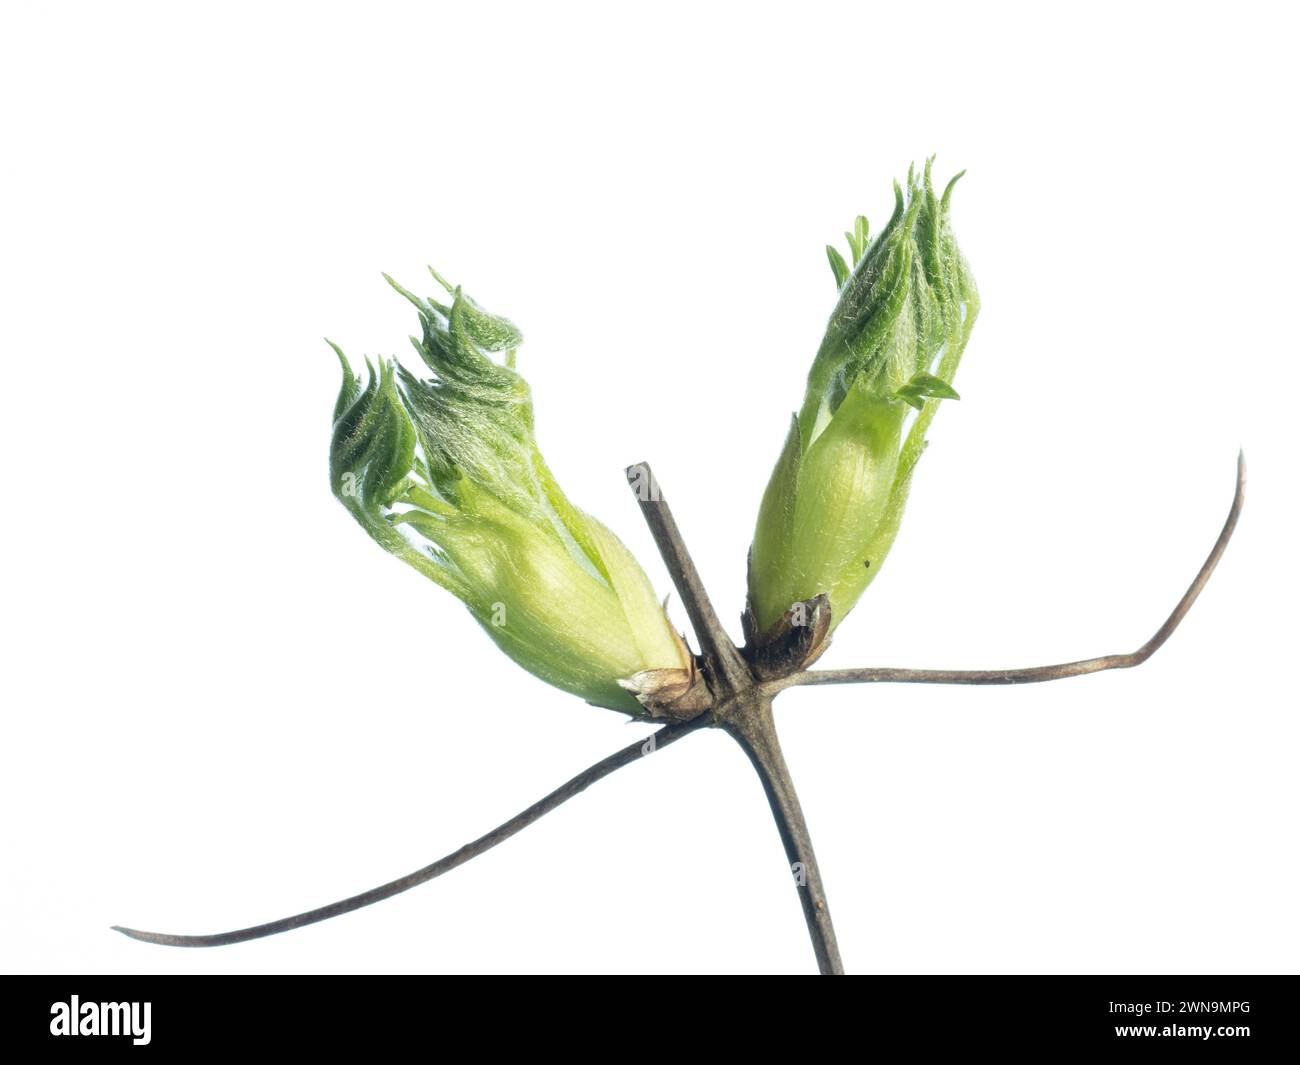 A close up of a pair of fresh green Clematis alpina buds against a white background Stock Photo